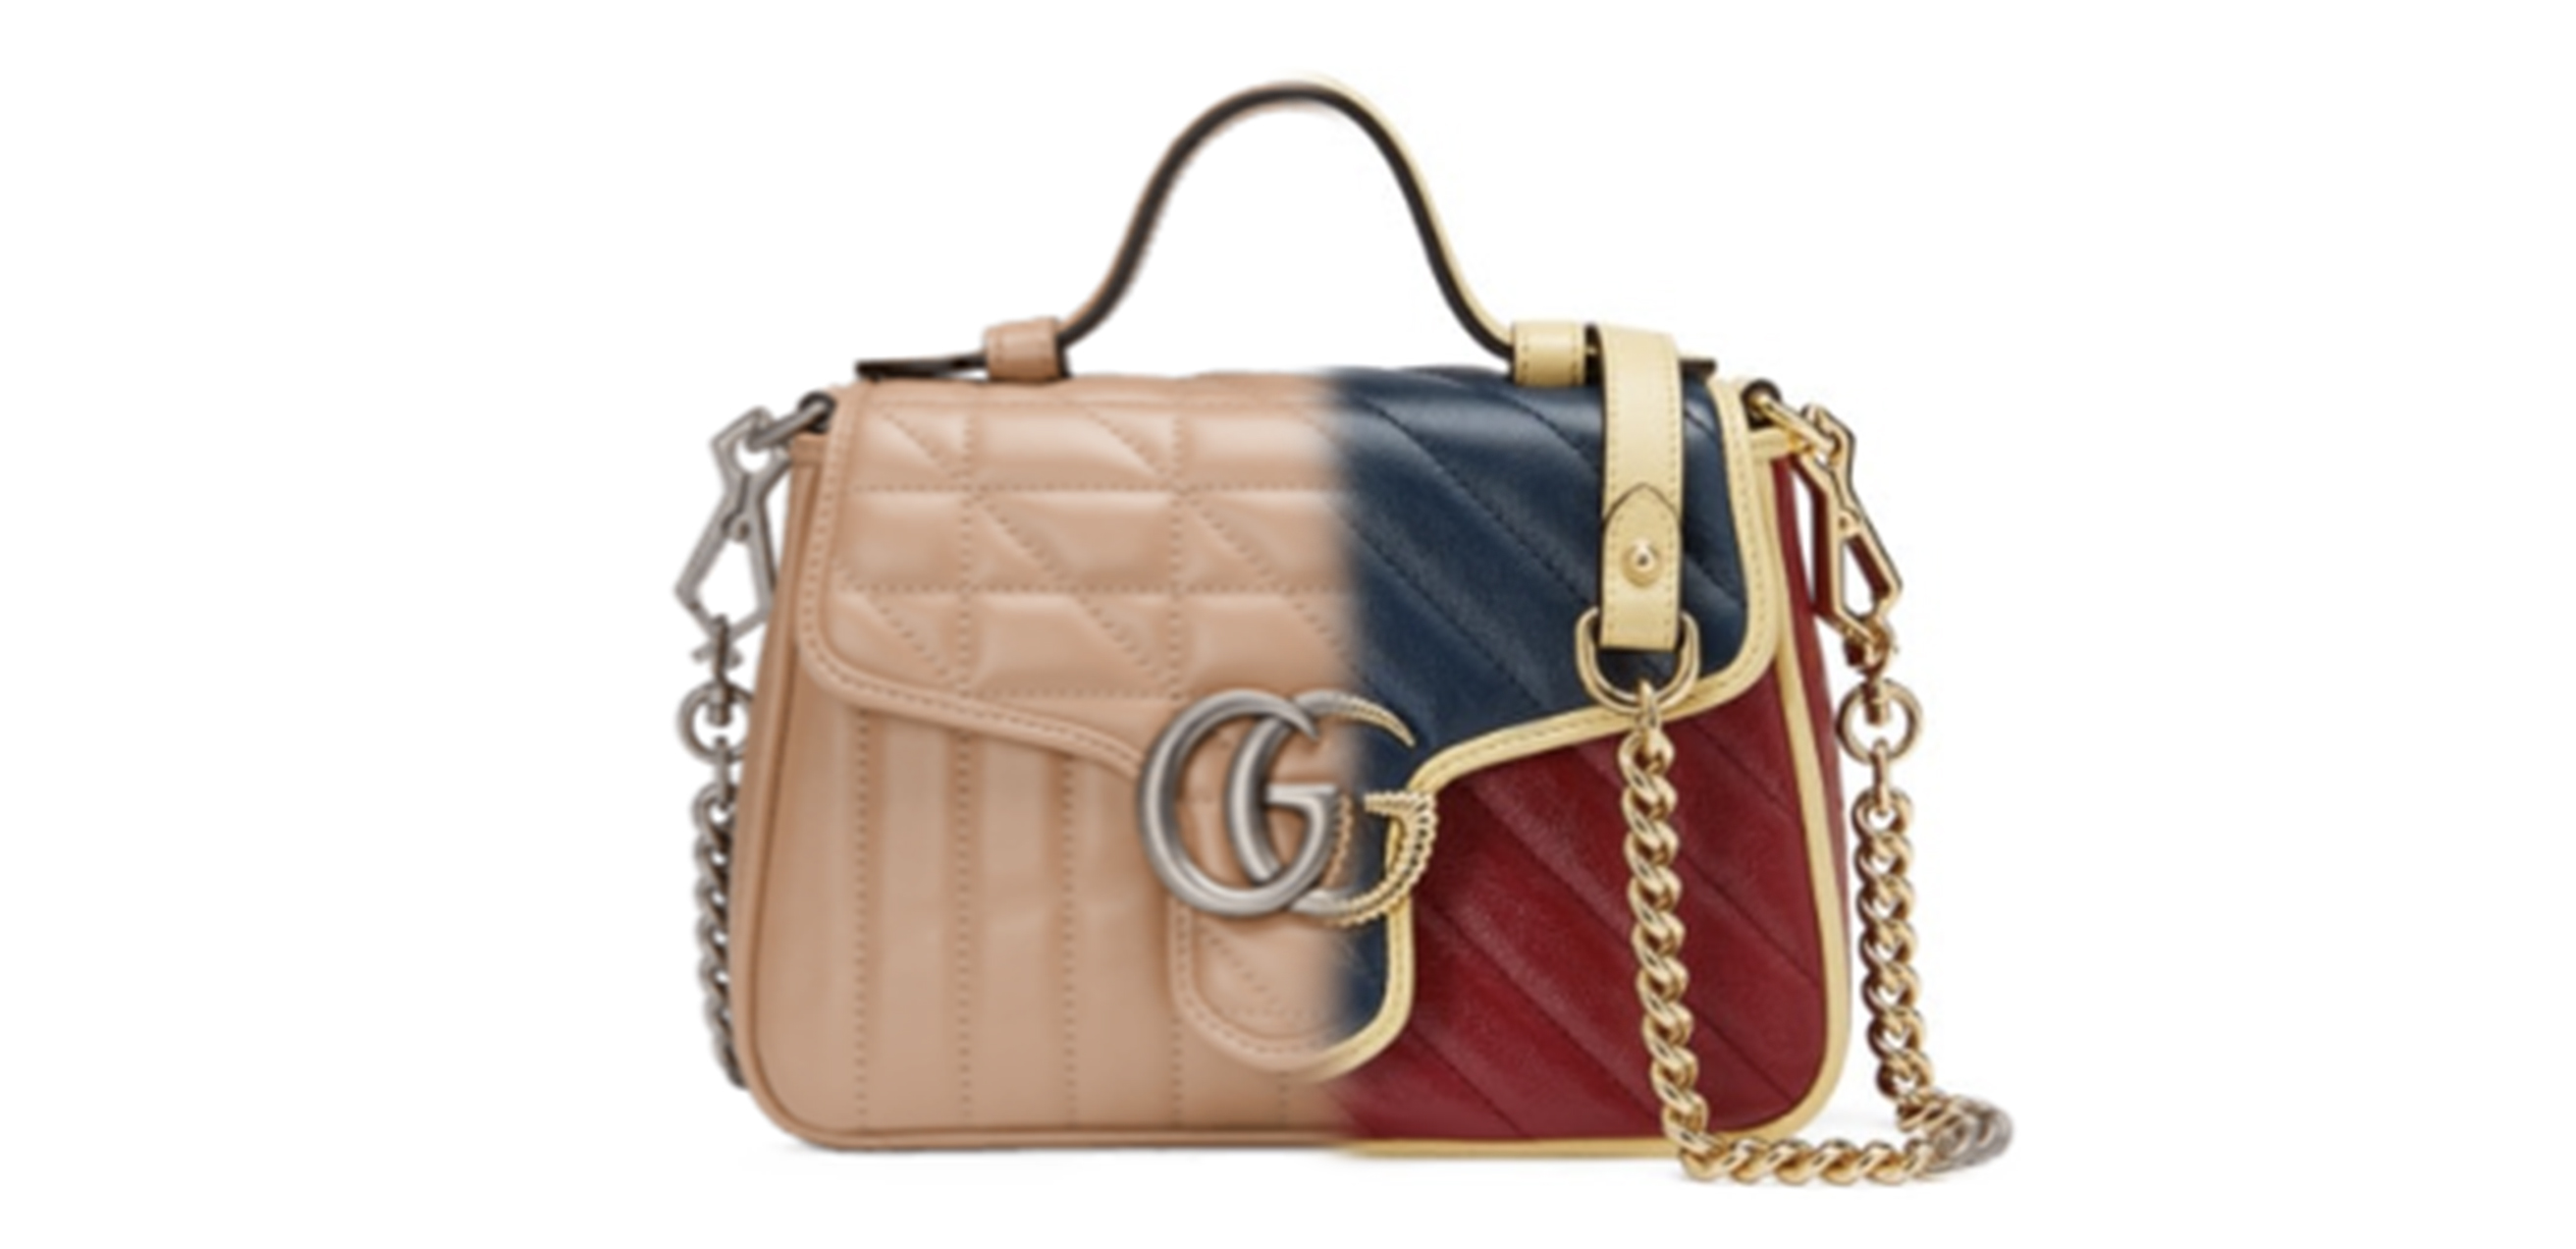 What is Gucci's most affordable handbag? - Quora